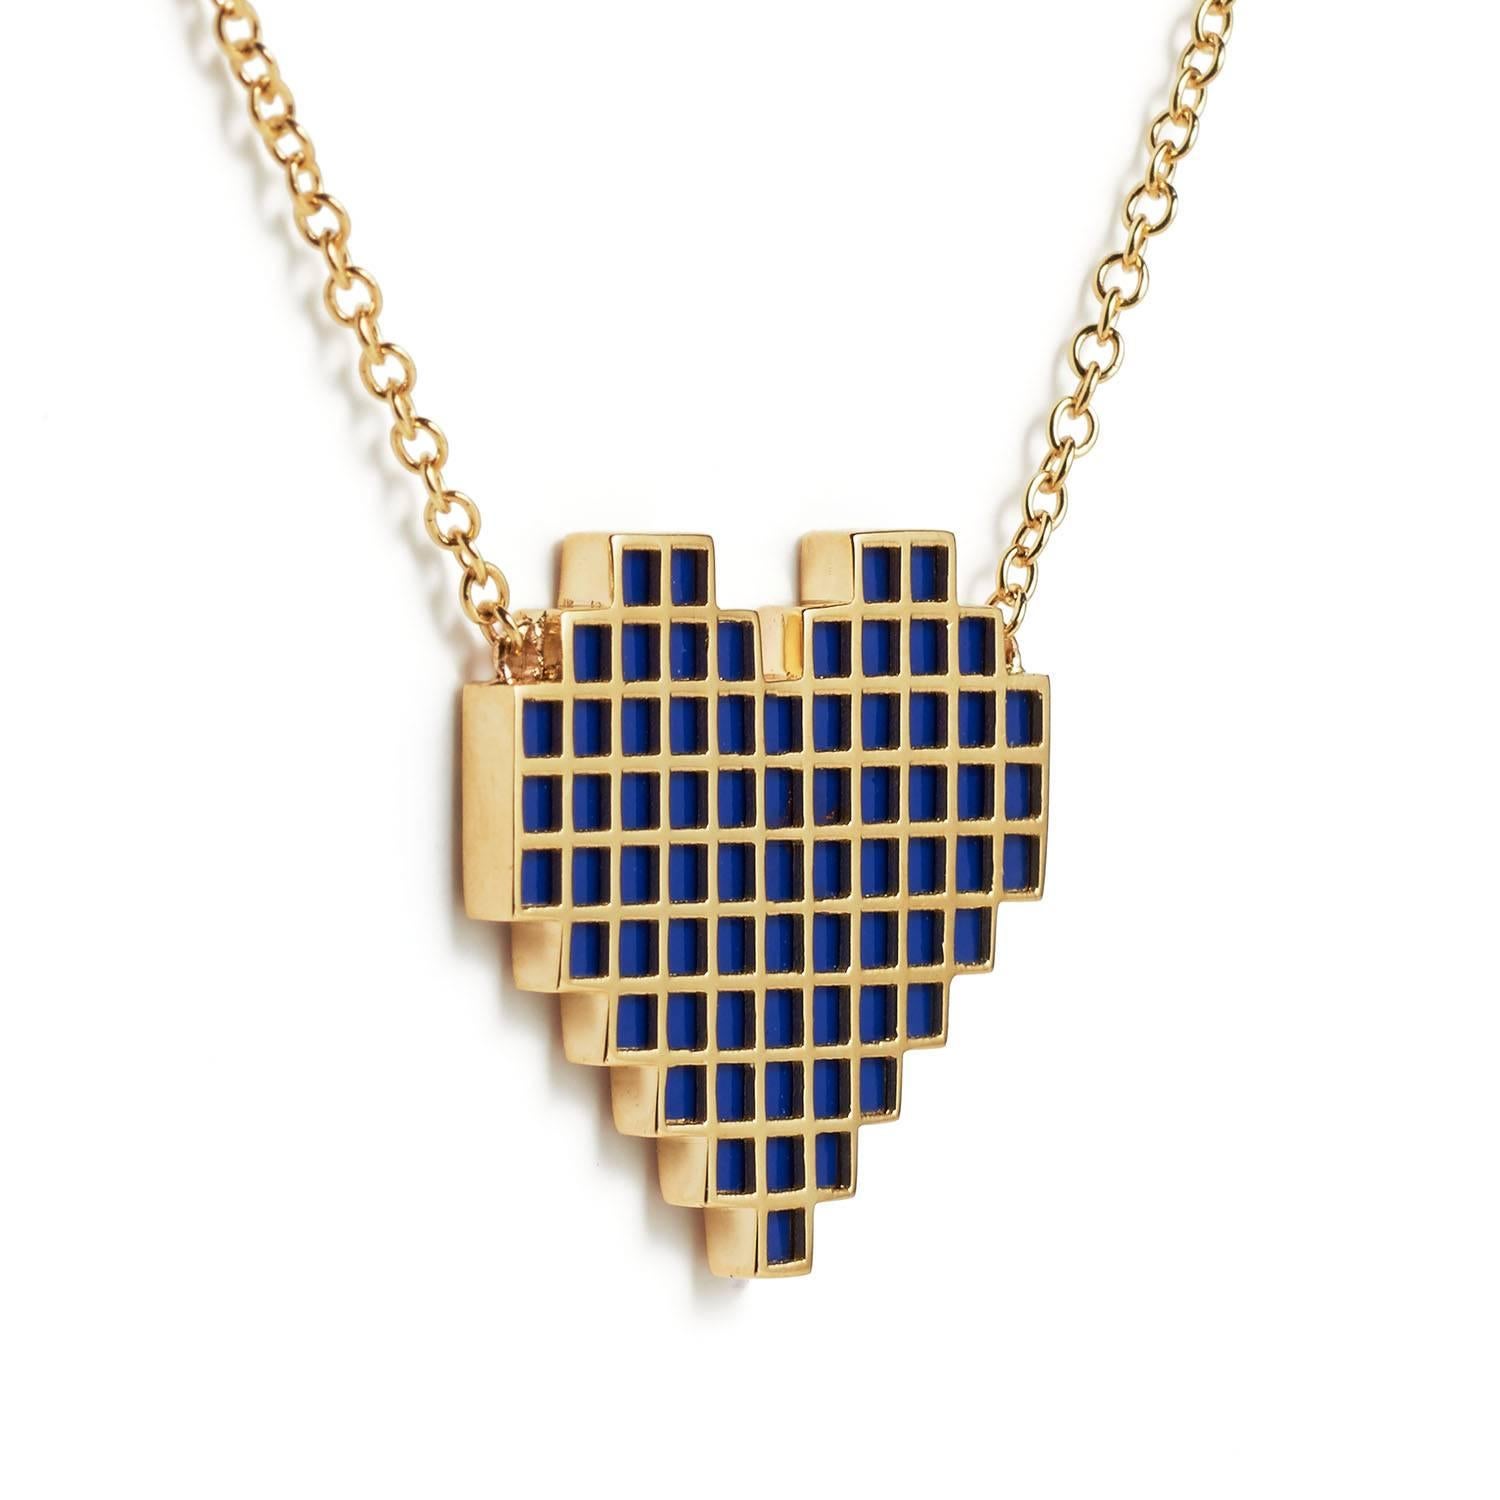 Contemporary Francesca Grima Yellow Gold and Enamel Reversible Pixel Heart Necklace For Sale